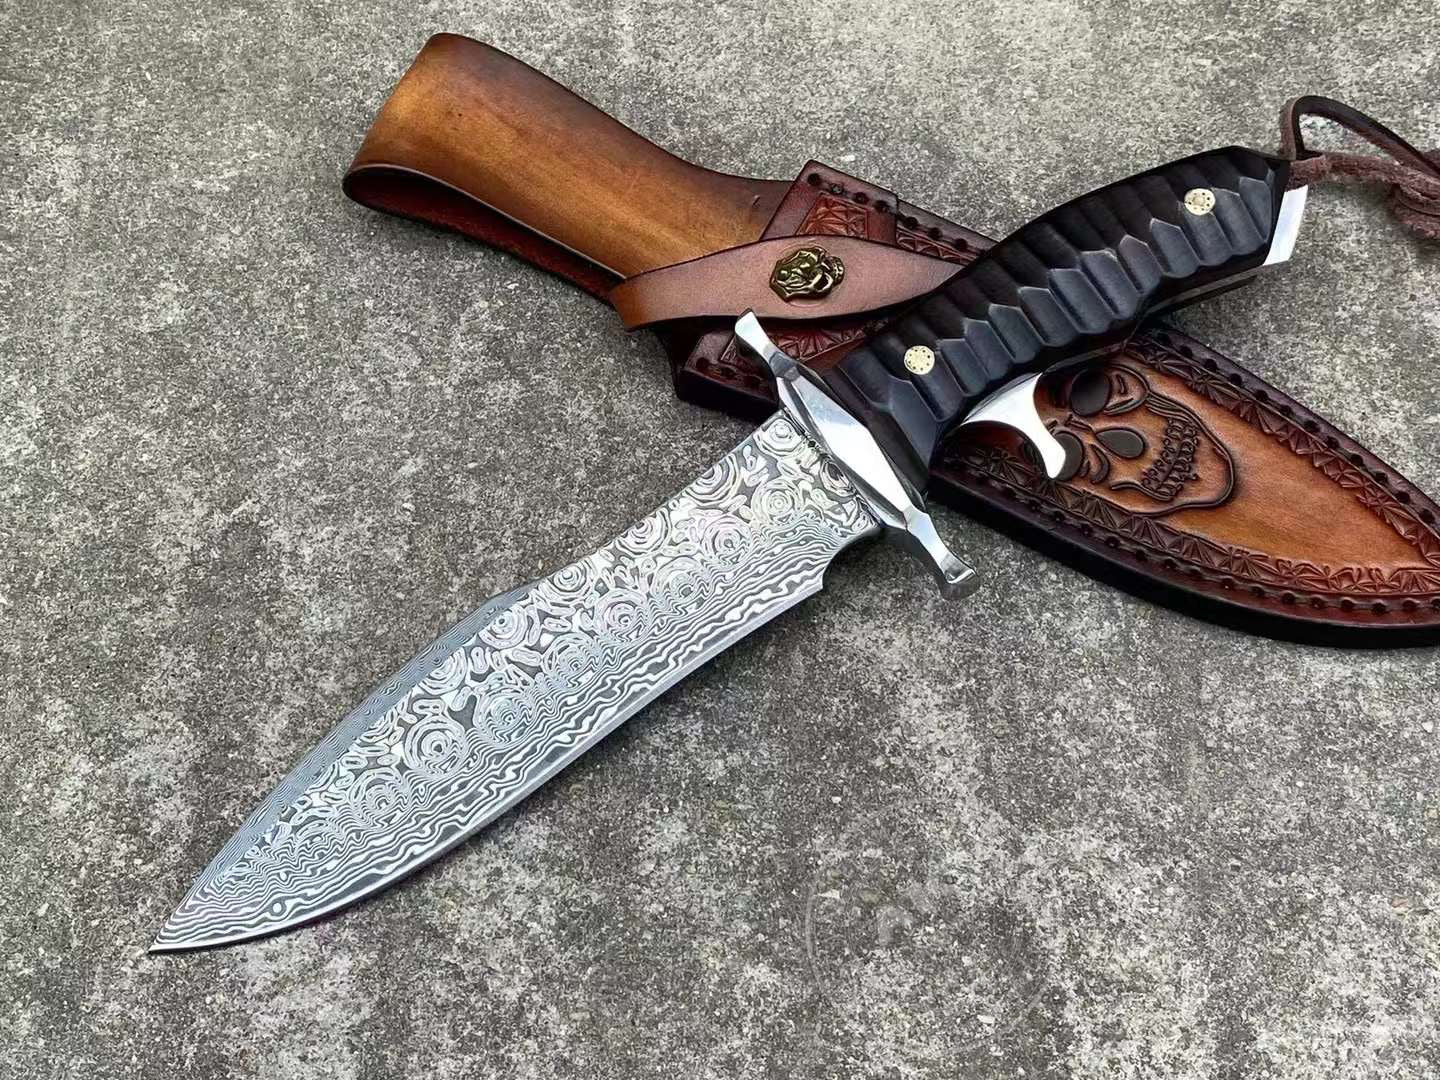 Hand Forged VG10 Damascus Steel Hunting Knife Bowie Survival Fixed Blade- AK-HT0786